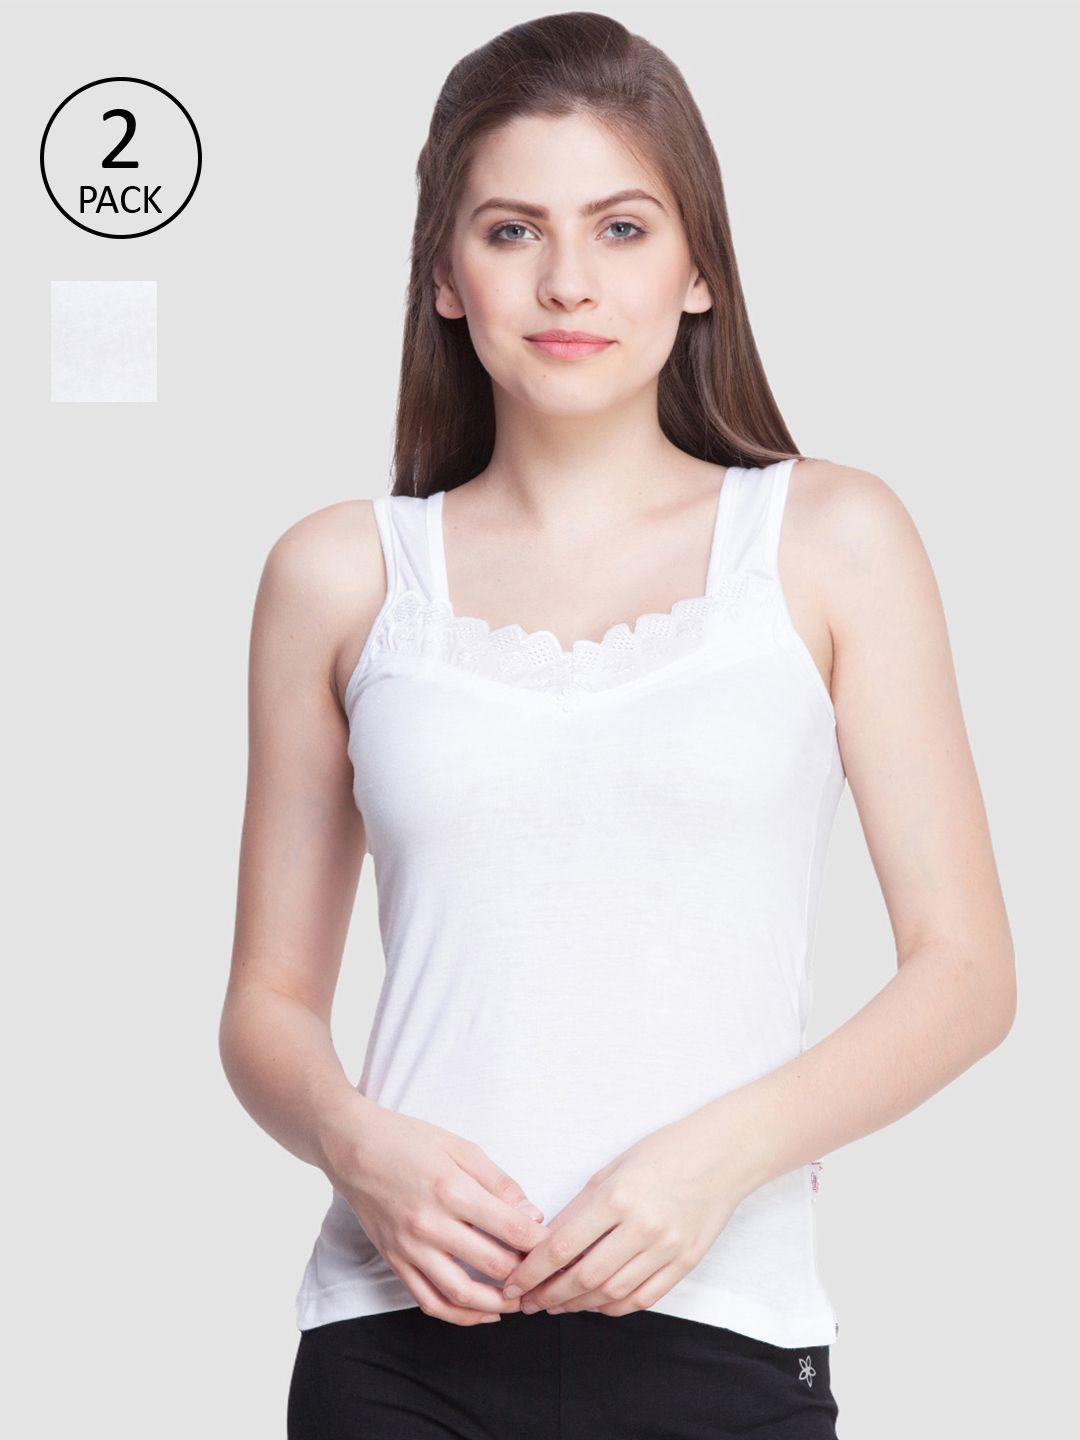 dollar-missy-women-white-pack-of-2-solid-cotton-camisole